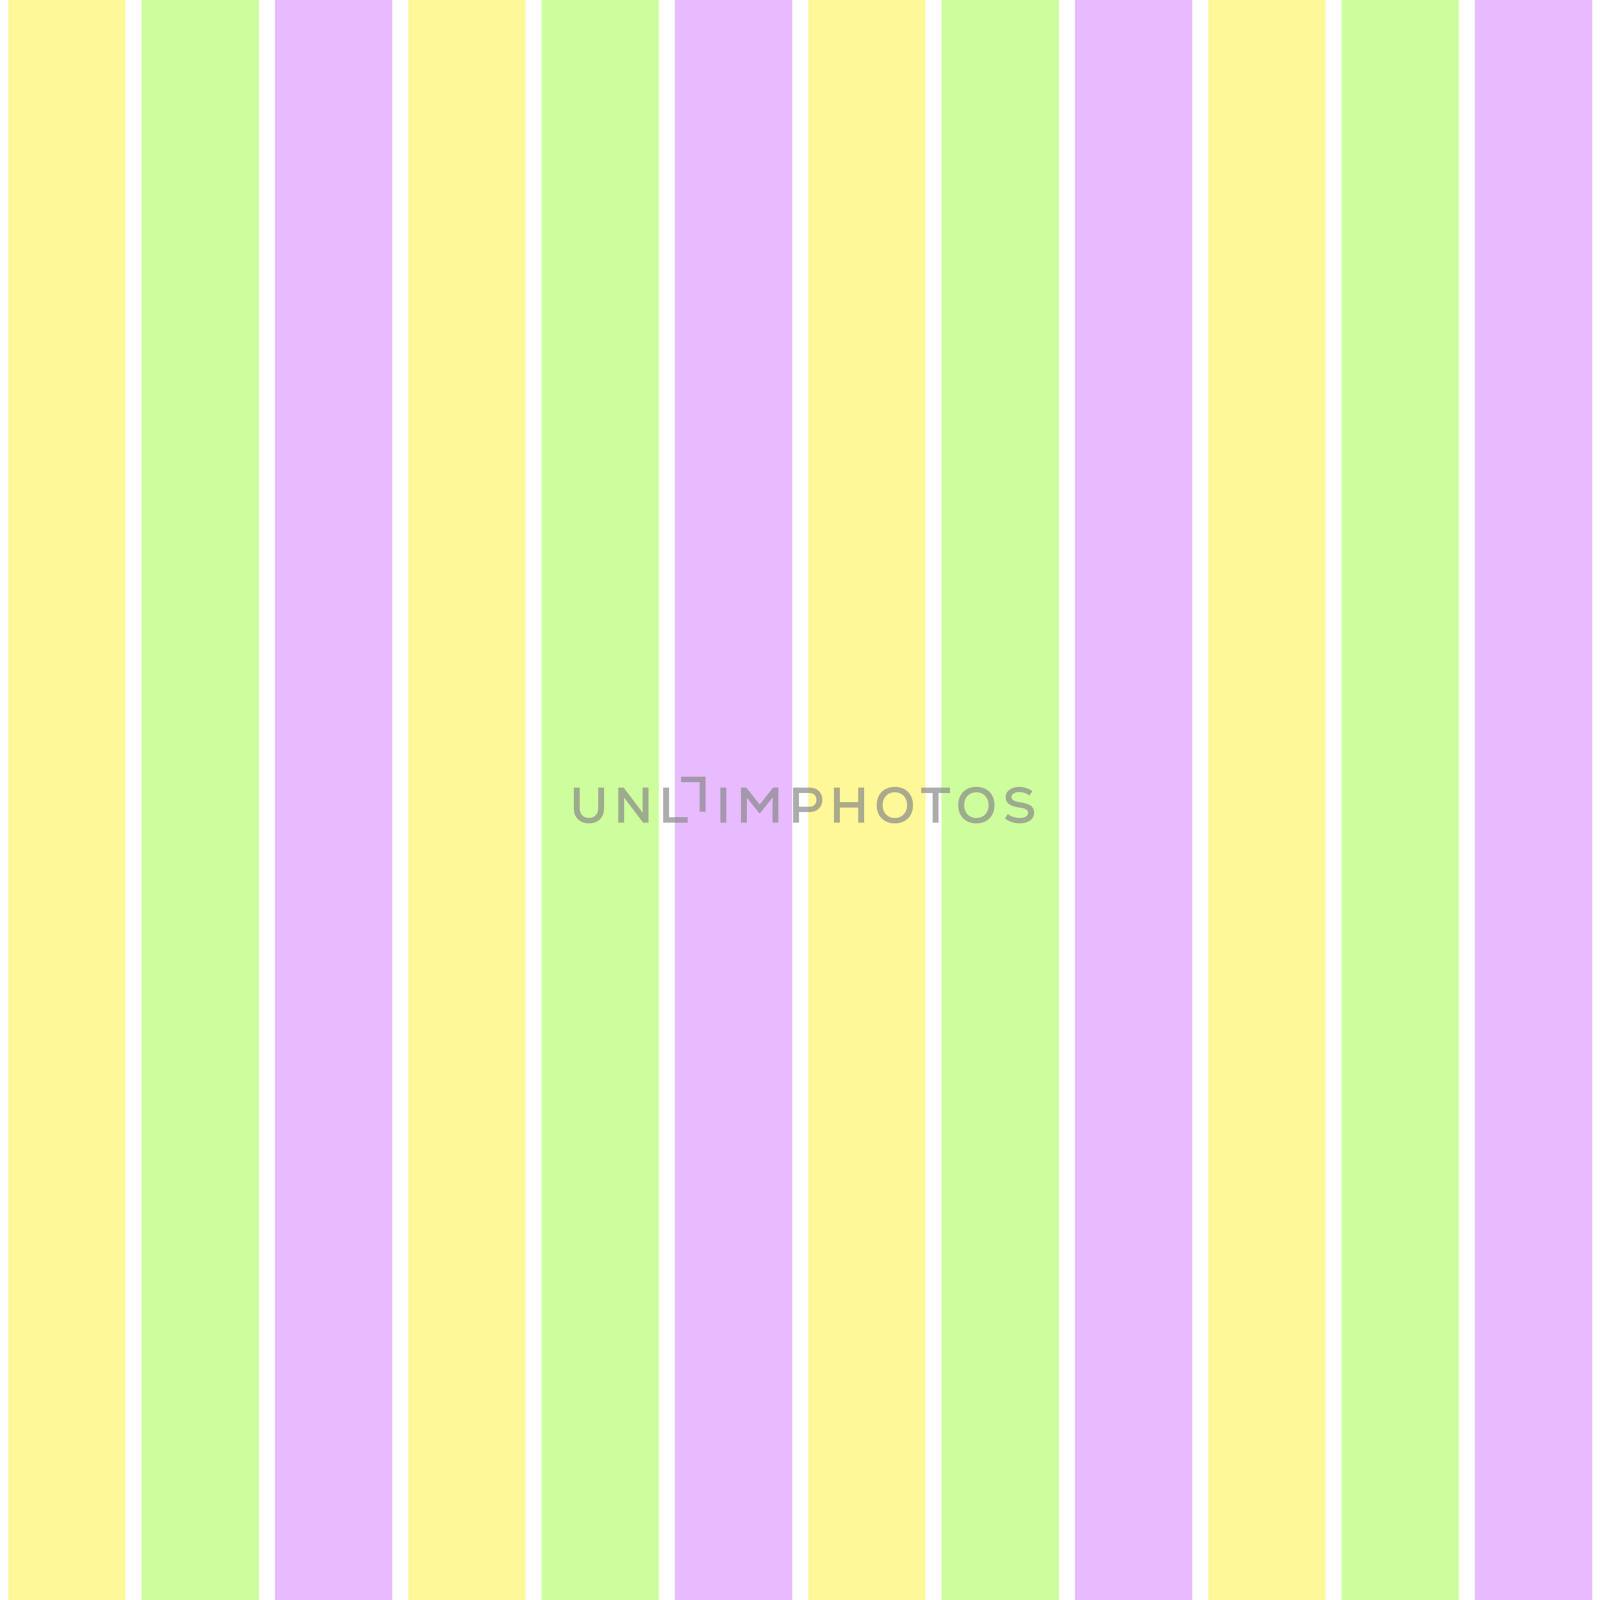 Pastel stripes in green, yellow, lavender, and white